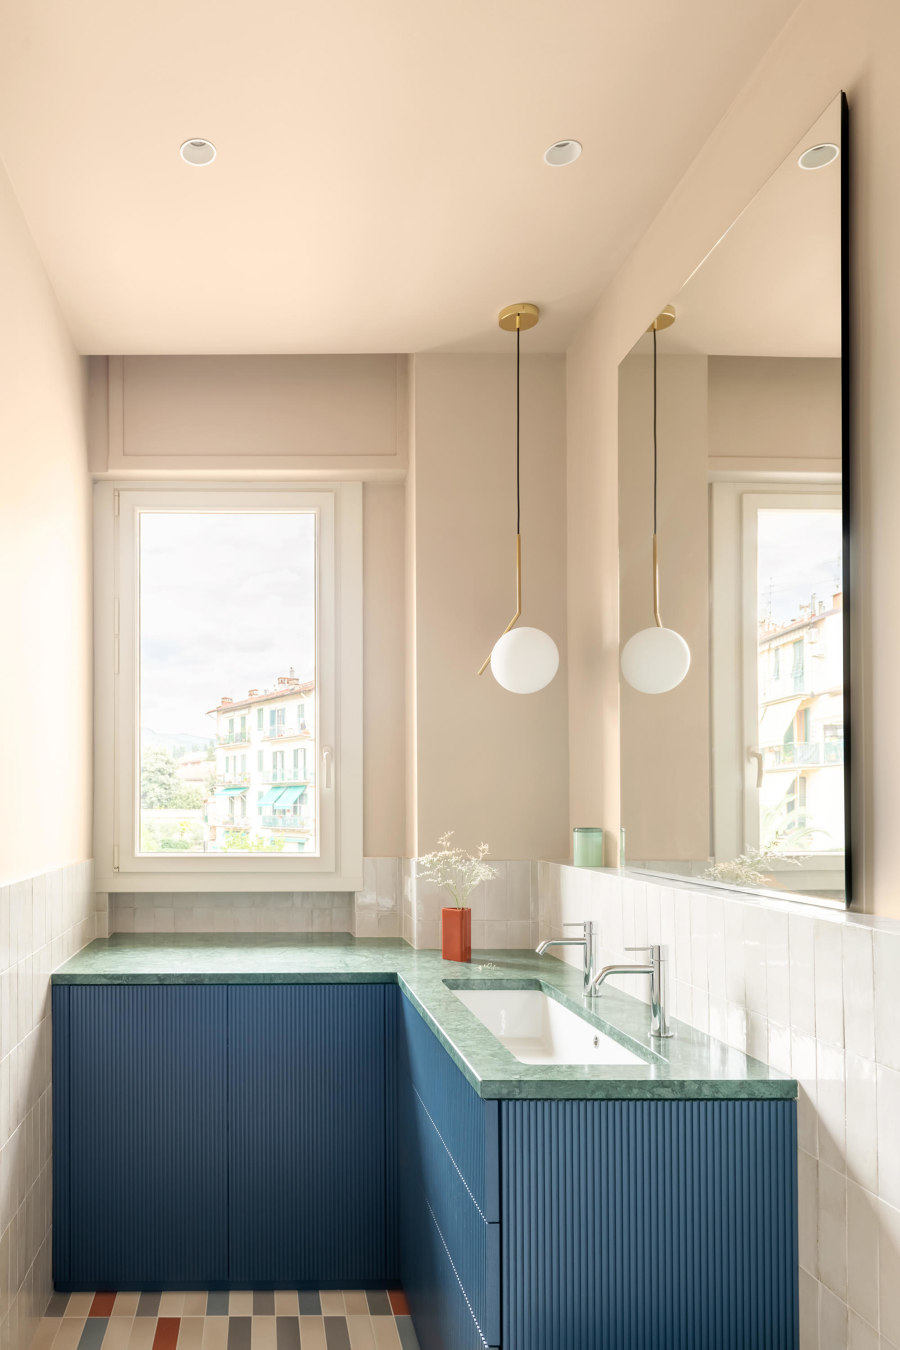 Top ten: curated bathrooms with wood surfaces | Nouveautés